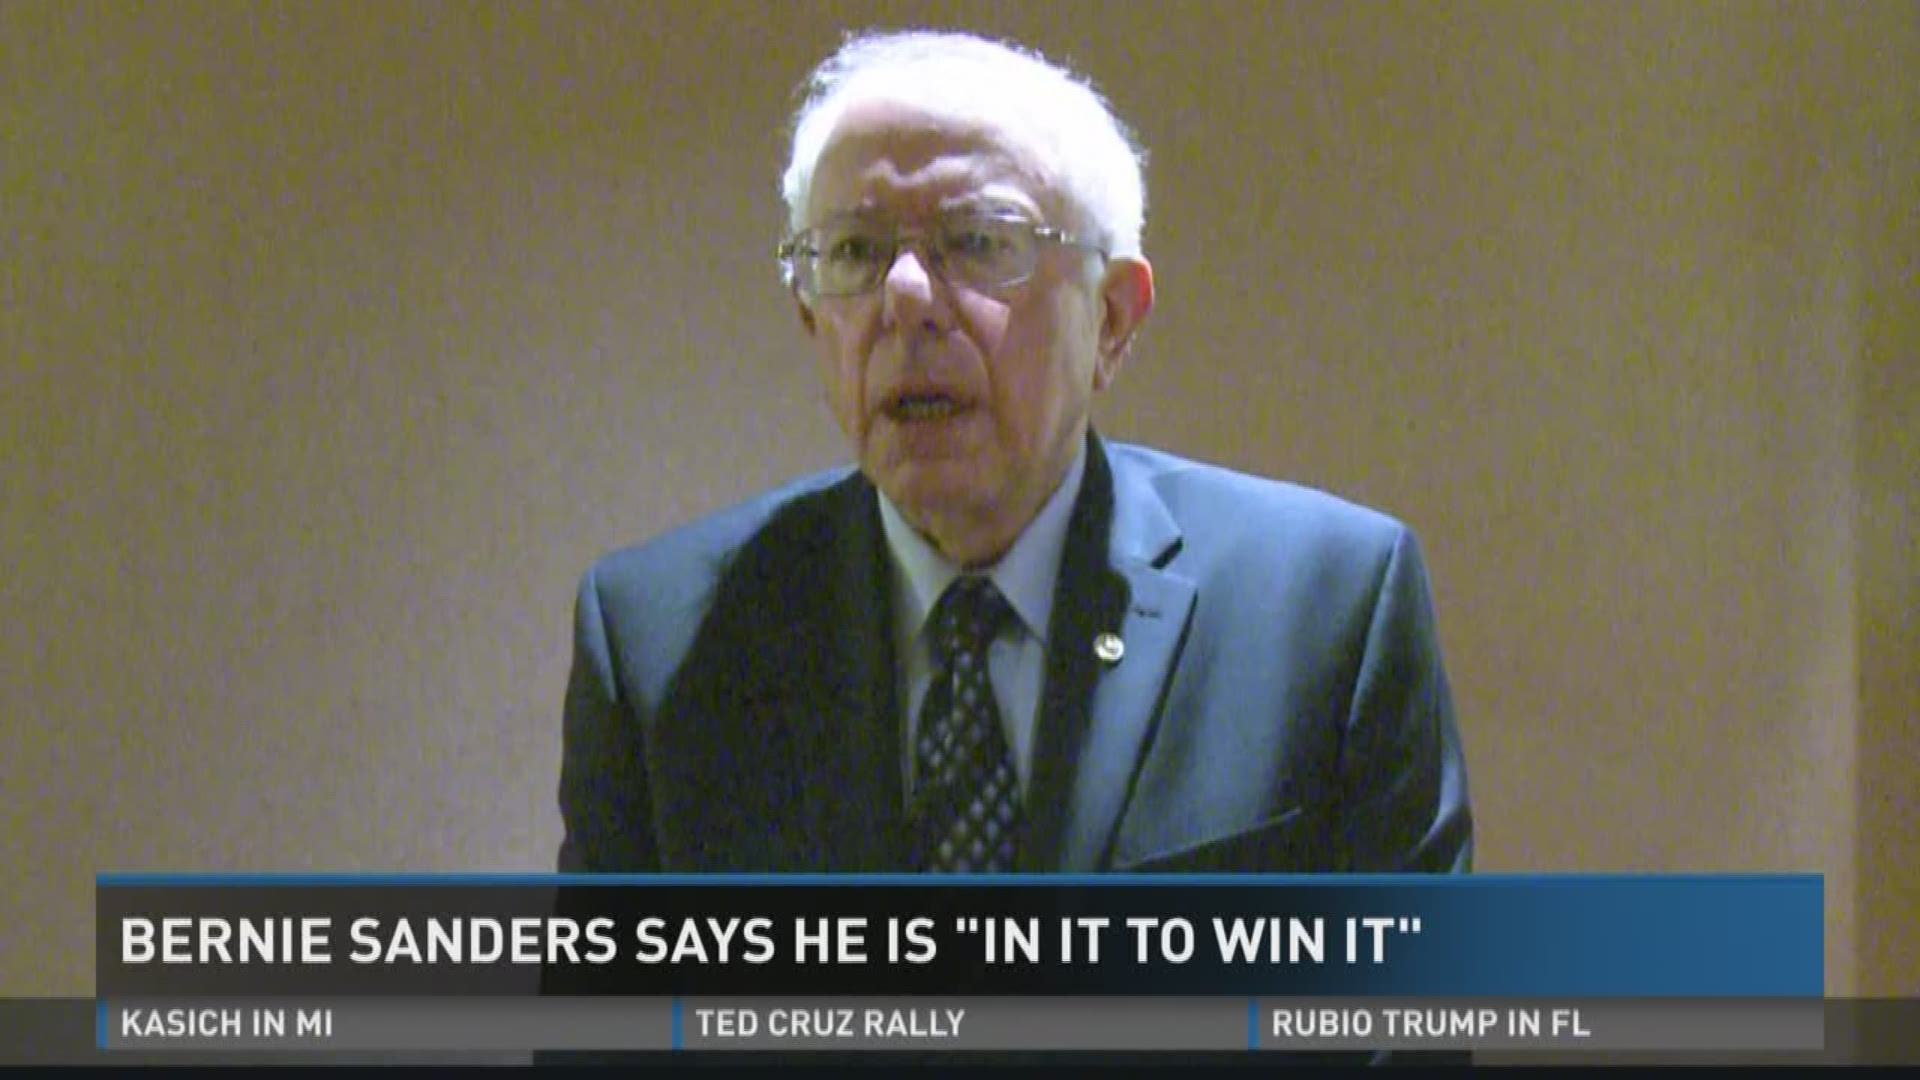 Sanders told WZZM 13's Phil Dawson that he will not drop out of the race if he gets second place.